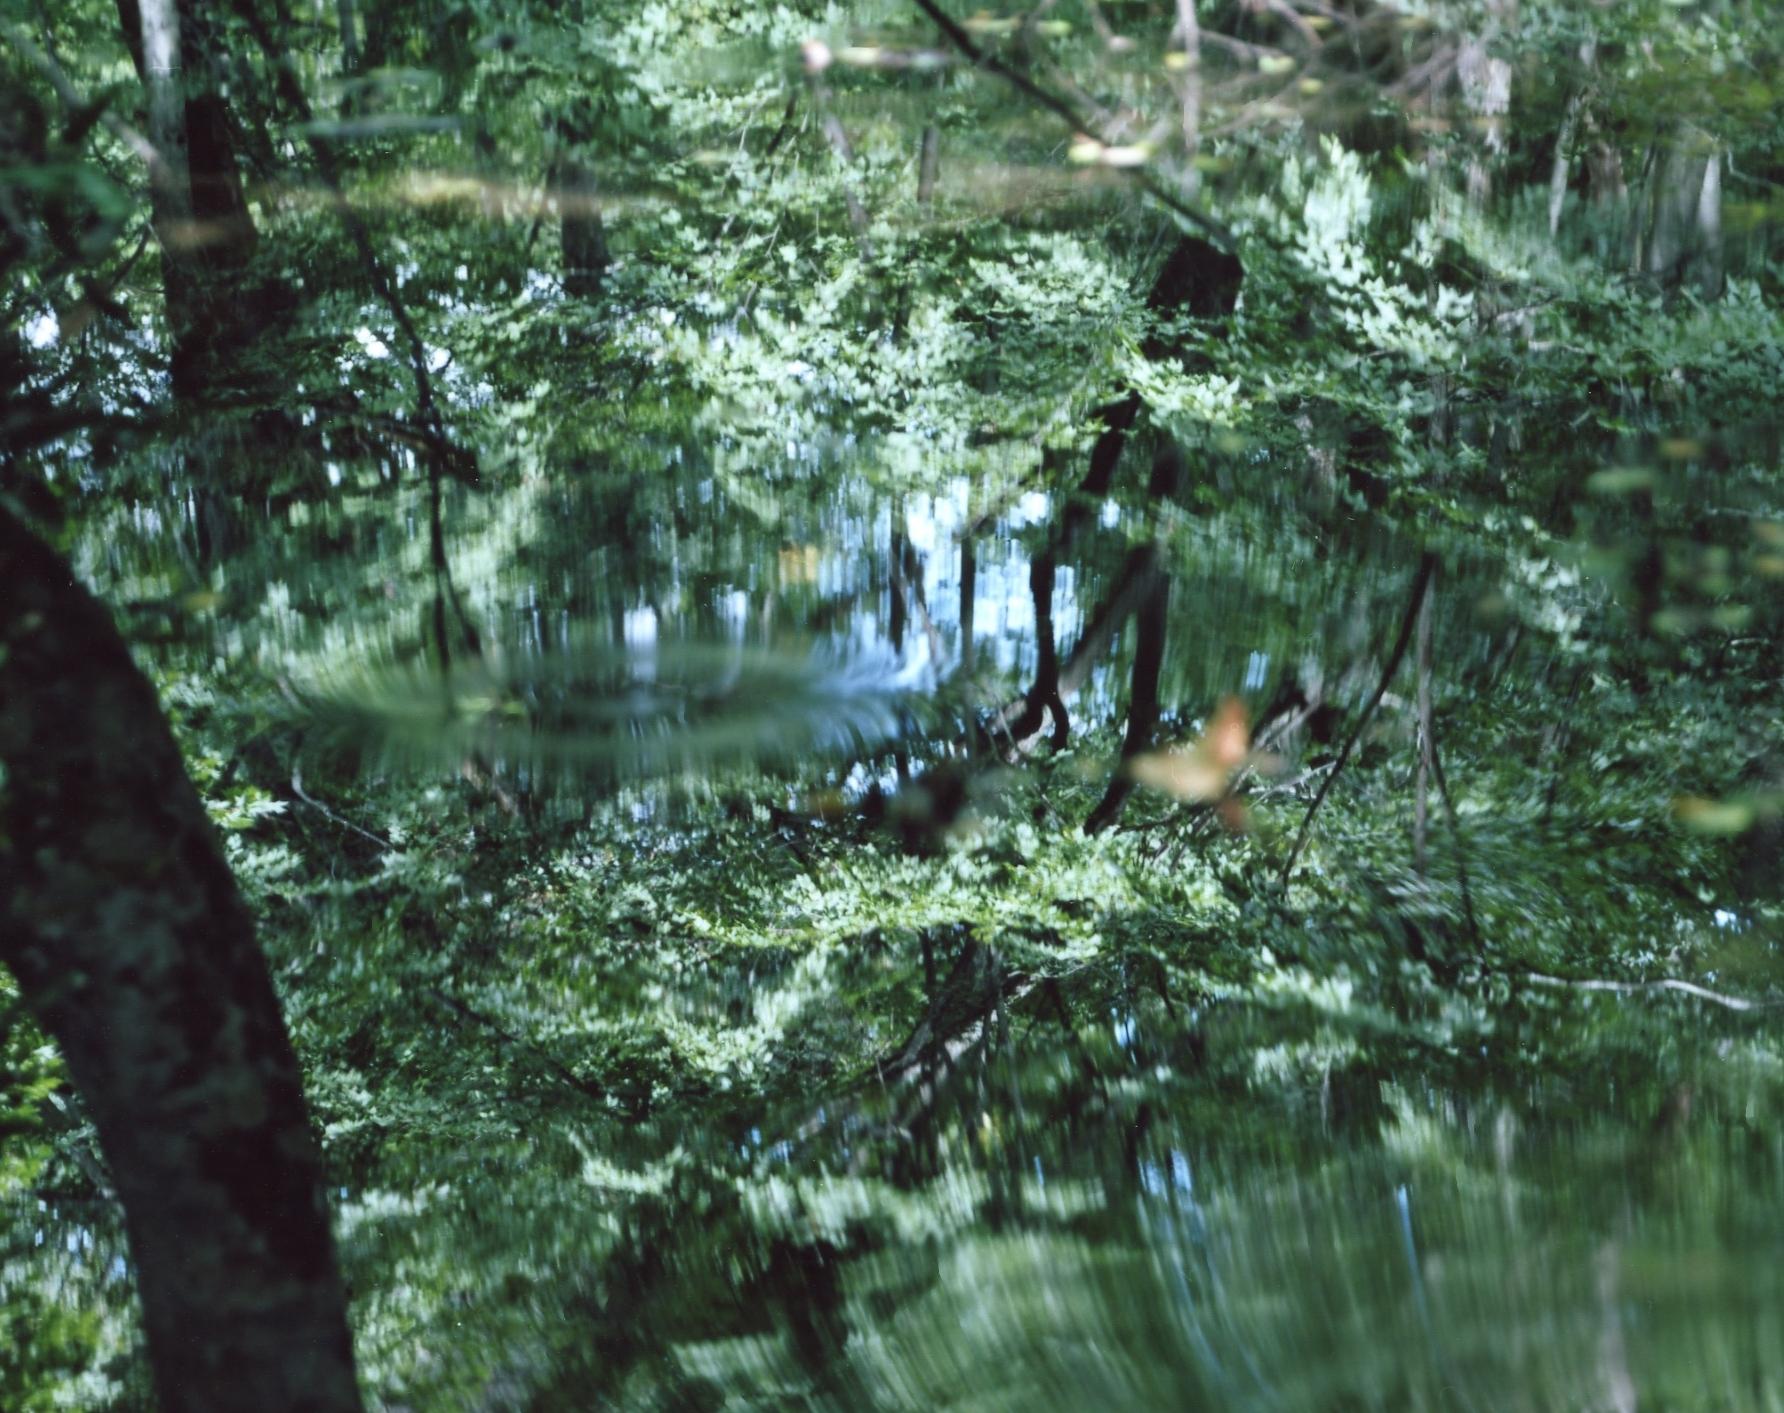 RISAKU SUZUKI (*1963, Japan)
Water Mirror 14,WM-61
2014
Chromogenic print
Sheet 120 x 155 cm (47 1/4 x 61 in.)
Edition of 5; Ed. no. 3/5
Framed

‘Water Mirror’is a condensation of all that makes Suzuki’s photography so appealing: his profound